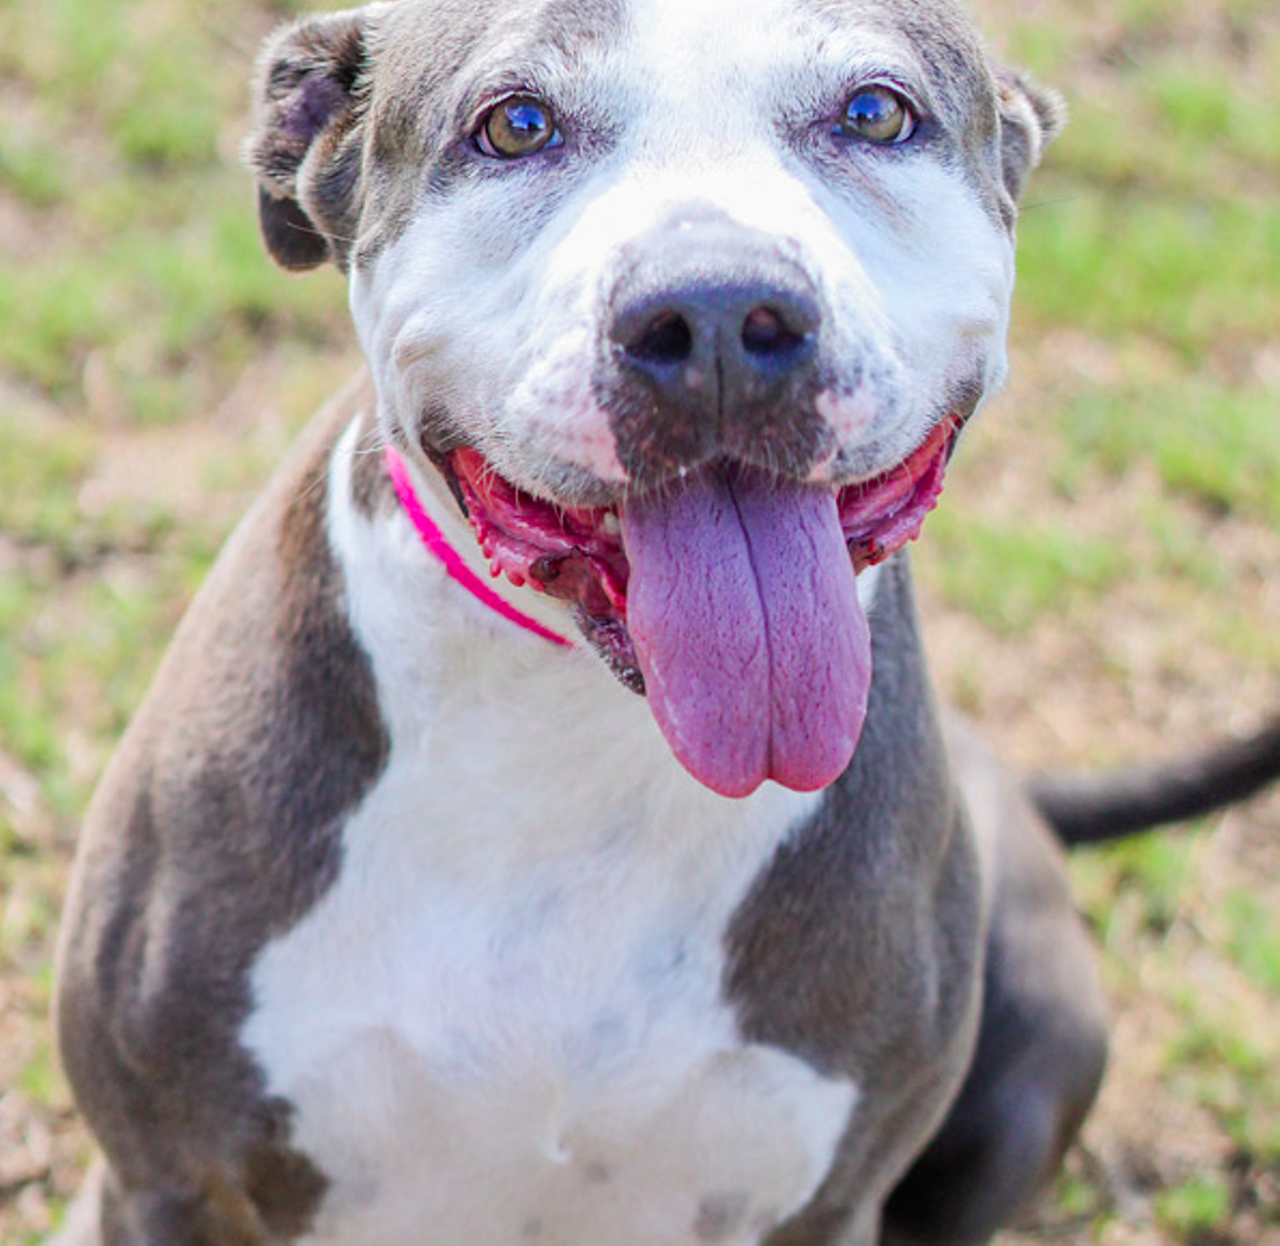 Missy
"Hello, hello, hello, hello! I’m Missy, the best gal you will ever meet. I am so excited to get to meet you and I will be even more excited if I get to see you in person near me! I am a very jolly and playful gal who loves to be goofy and always wants to have everyone smiling. We should definitely meet right now! Can’t wait till we hang around the doggie park and become a forever family."